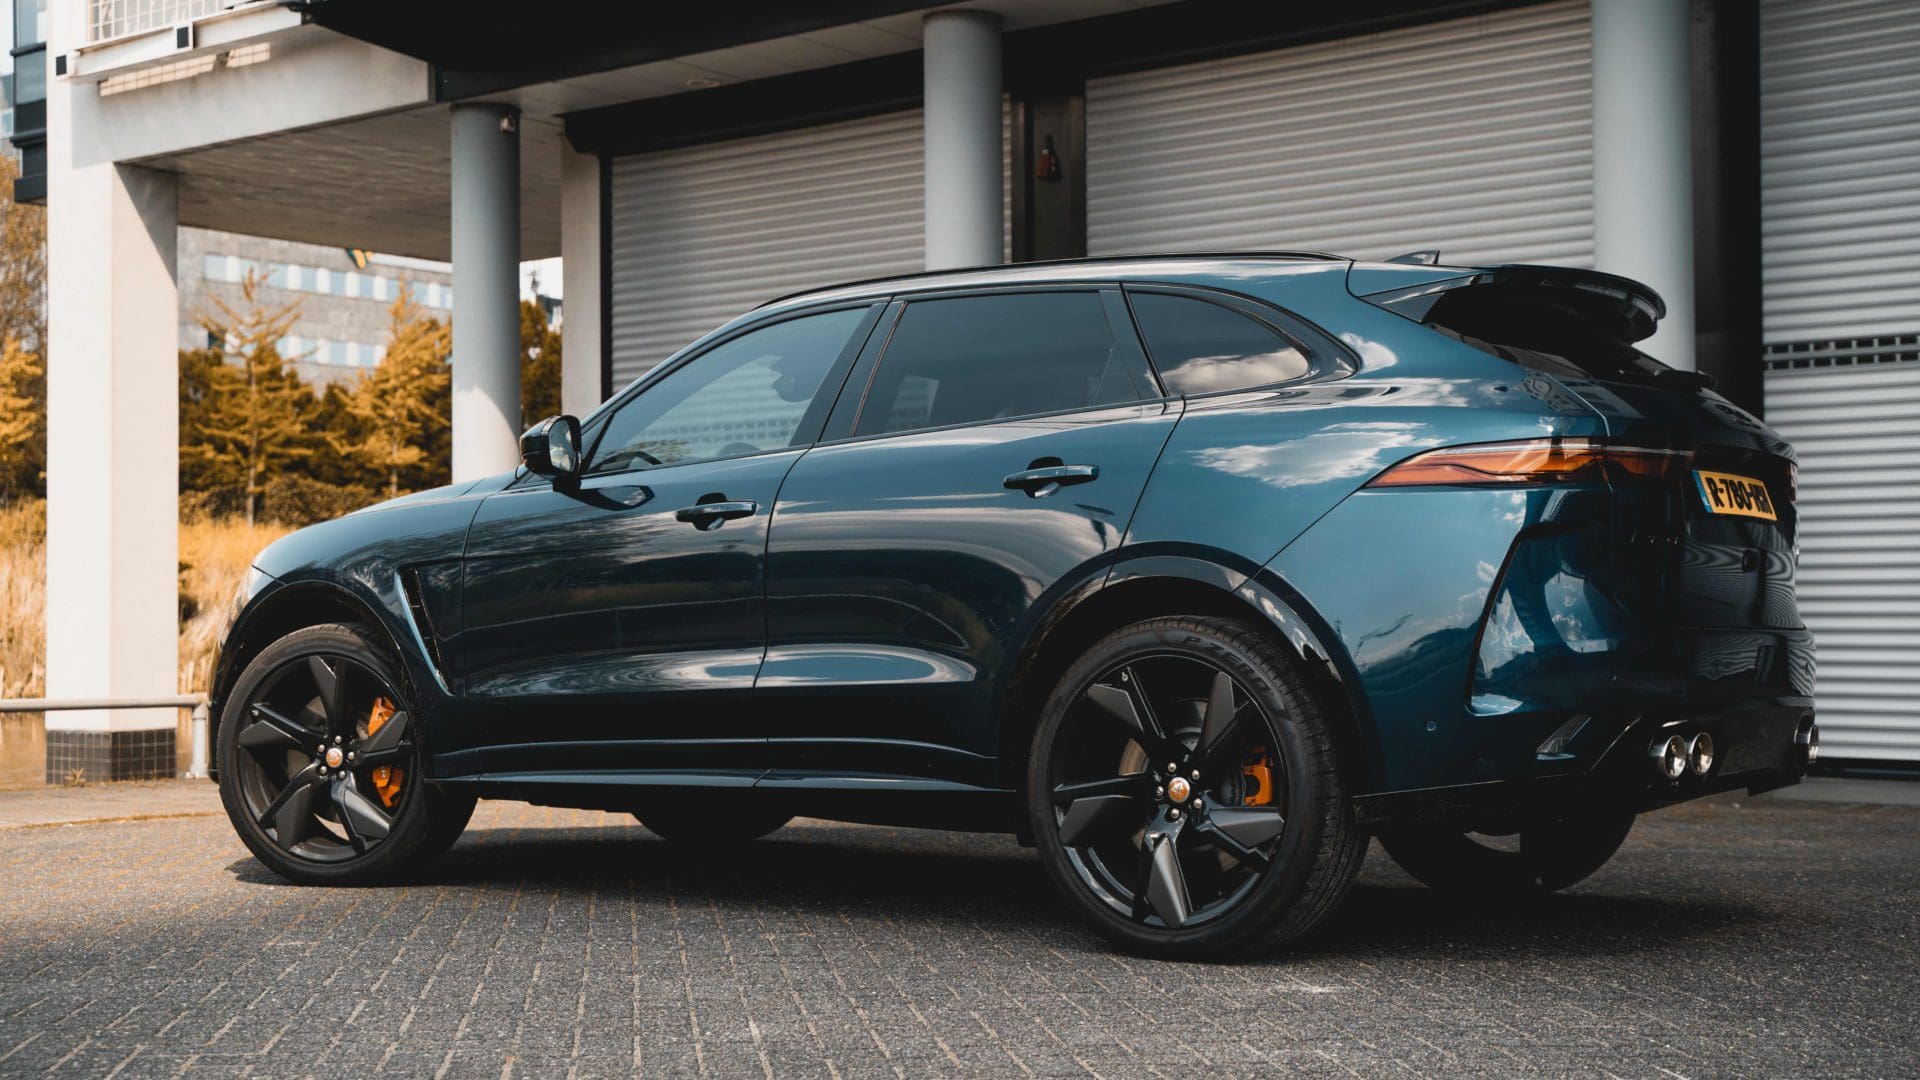 <strong>Jaguar F-Pace SVR:</strong> A final ode to the V8″ width=”1140″ height=”641″ srcset=”https://www.manify.nl/wp-content/uploads/2023/06/Jaguar_FPACE_SVR_@MANIFYNL_7-1920×1080.jpg 1920w, https: //www.manify.nl/wp-content/uploads/2023/06/Jaguar_FPACE_SVR_@MANIFYNL_7-300×169.jpg 300w, https://www.manify.nl/wp-content/uploads/2023/06/Jaguar_FPACE_SVR_@MANIFYNL_7 -1024×576.jpg 1024w, https://www.manify.nl/wp-content/uploads/2023/06/Jaguar_FPACE_SVR_@MANIFYNL_7-711×400.jpg 711w, https://www.manify.nl/wp-content/uploads /2023/06/Jaguar_FPACE_SVR_@MANIFYNL_7-355×200.jpg 355w” data-sizes=”(max-width: 1140px) 100vw, 1140px” bad-src=”data:image/gif;base64,R0lGODlhAQABAAAAAACH5BAEKAAEALAAAAAAAAAAAAAACTAEAOw==”/><strong>Jaguar F-Pace SVR:</strong> A final ode to the V8″ width=”1140″ height=”641″ srcset=”https://www.manify.nl/wp-content/uploads/2023/06/Jaguar_FPACE_SVR_@MANIFYNL_7-1920×1080.jpg 1920w, https: //www.manify.nl/wp-content/uploads/2023/06/Jaguar_FPACE_SVR_@MANIFYNL_7-300×169.jpg 300w, https://www.manify.nl/wp-content/uploads/2023/06/Jaguar_FPACE_SVR_@MANIFYNL_7 -1024×576.jpg 1024w, https://www.manify.nl/wp-content/uploads/2023/06/Jaguar_FPACE_SVR_@MANIFYNL_7-711×400.jpg 711w, https://www.manify.nl/wp-content/uploads /2023/06/Jaguar_FPACE_SVR_@MANIFYNL_7-355×200.jpg 355w” sizes=”(max-width: 1140px) 100vw, 1140px”/></p>
<h3>The arrangement</h3>
<p>If we look at the F-Pace petrol range, the party starts <strong>R Dynamic S</strong> performance.  This one has 205 hp and can be found on your doorstep for €106,000.  One step up follows <strong>R Dynamic SE,</strong> it has 250 hp and will cost you €113,000.  One step up we get <strong>R Dynamic HSE. </strong>It has a combined power (because of the plug-in hybrid) of 404 hp and will cost you €98,000, which is 15k cheaper than <strong>SE</strong>.  Of <strong>400 Games</strong> it has 400 hp and costs you € 140,000 and like the King Number there is <strong>SVR</strong>which has 550 hp and is available for € 183,000.</p>
<div class='code-block code-block-2' style='margin: 8px 0; clear: both;'>
<script async src=